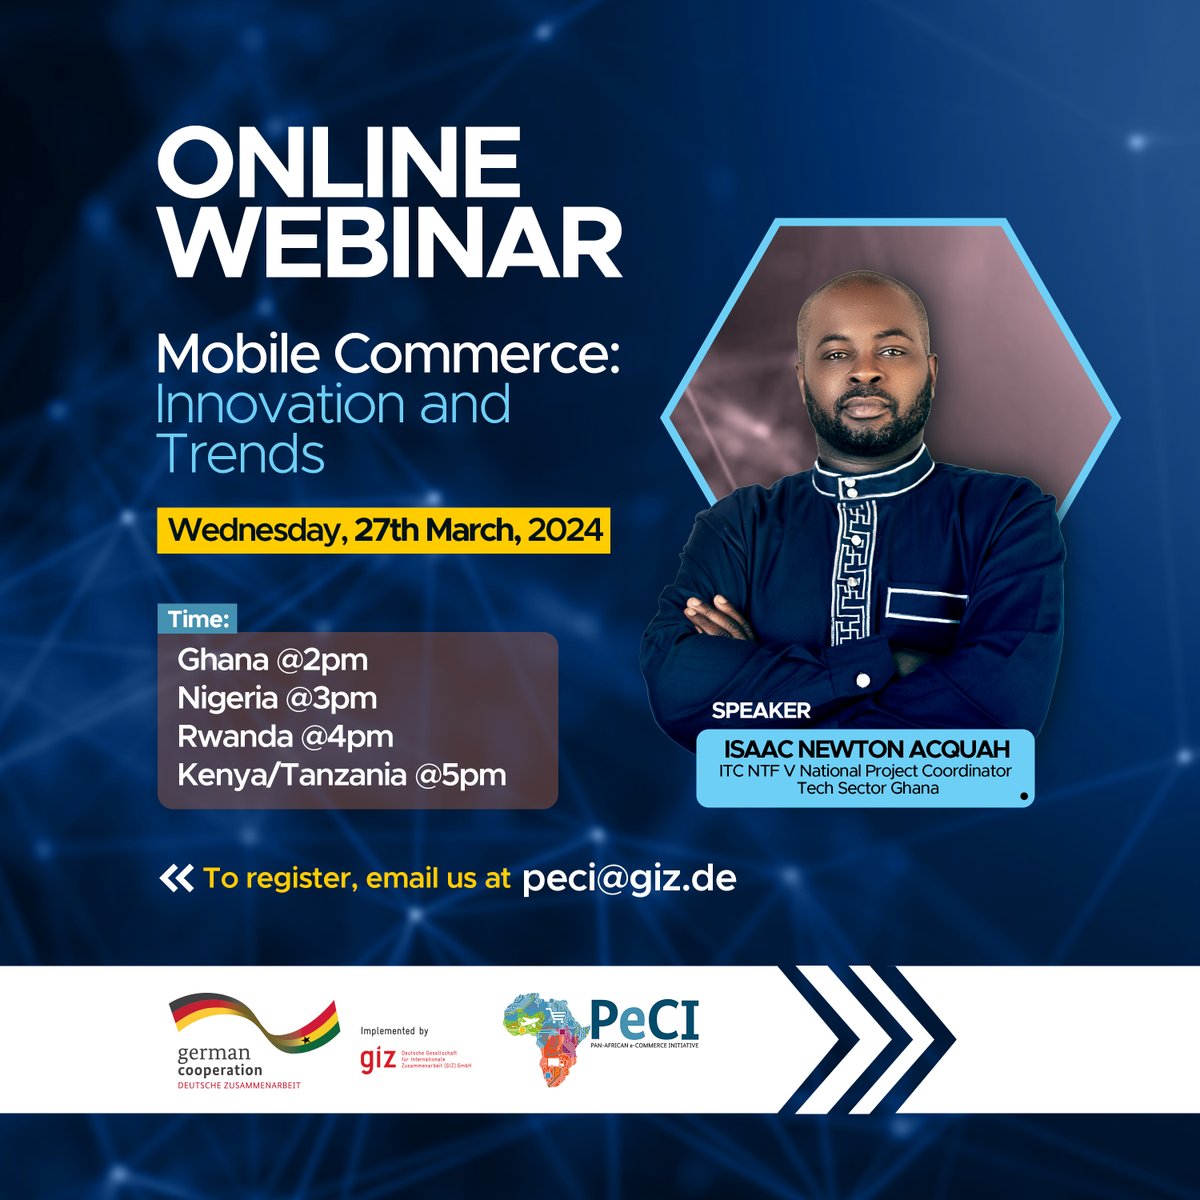 📱 Join PeCI's Online Webinar on March 27th! Stay tuned for insights on Mobile Commerce, E-Commerce, Digital Trade, and Pan-African commerce. Let's dive into the trends together! 🚀 #MobileCommerce  #ECommerce #PanAfrican #GermanCooperation To register email us at peci@giz.de